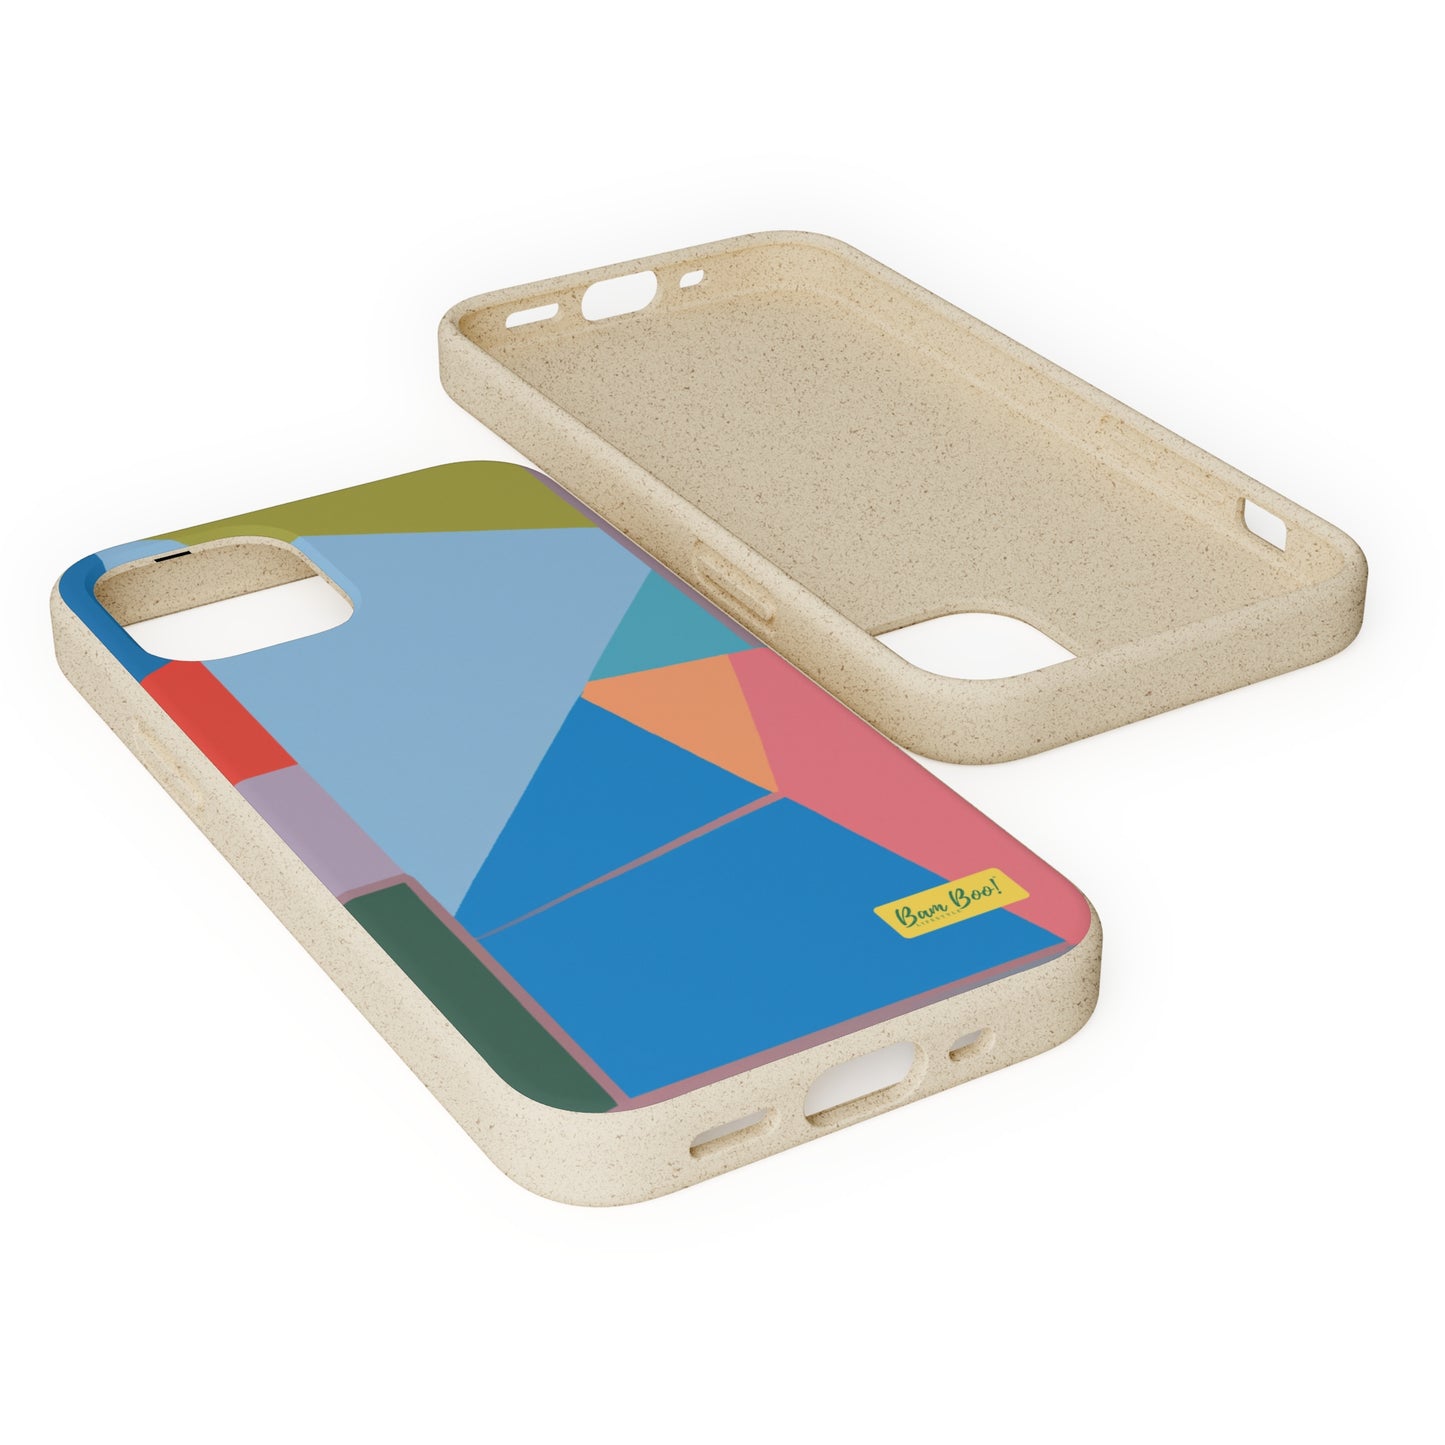 "A Haven of Harmony" - Bam Boo! Lifestyle Eco-friendly Cases